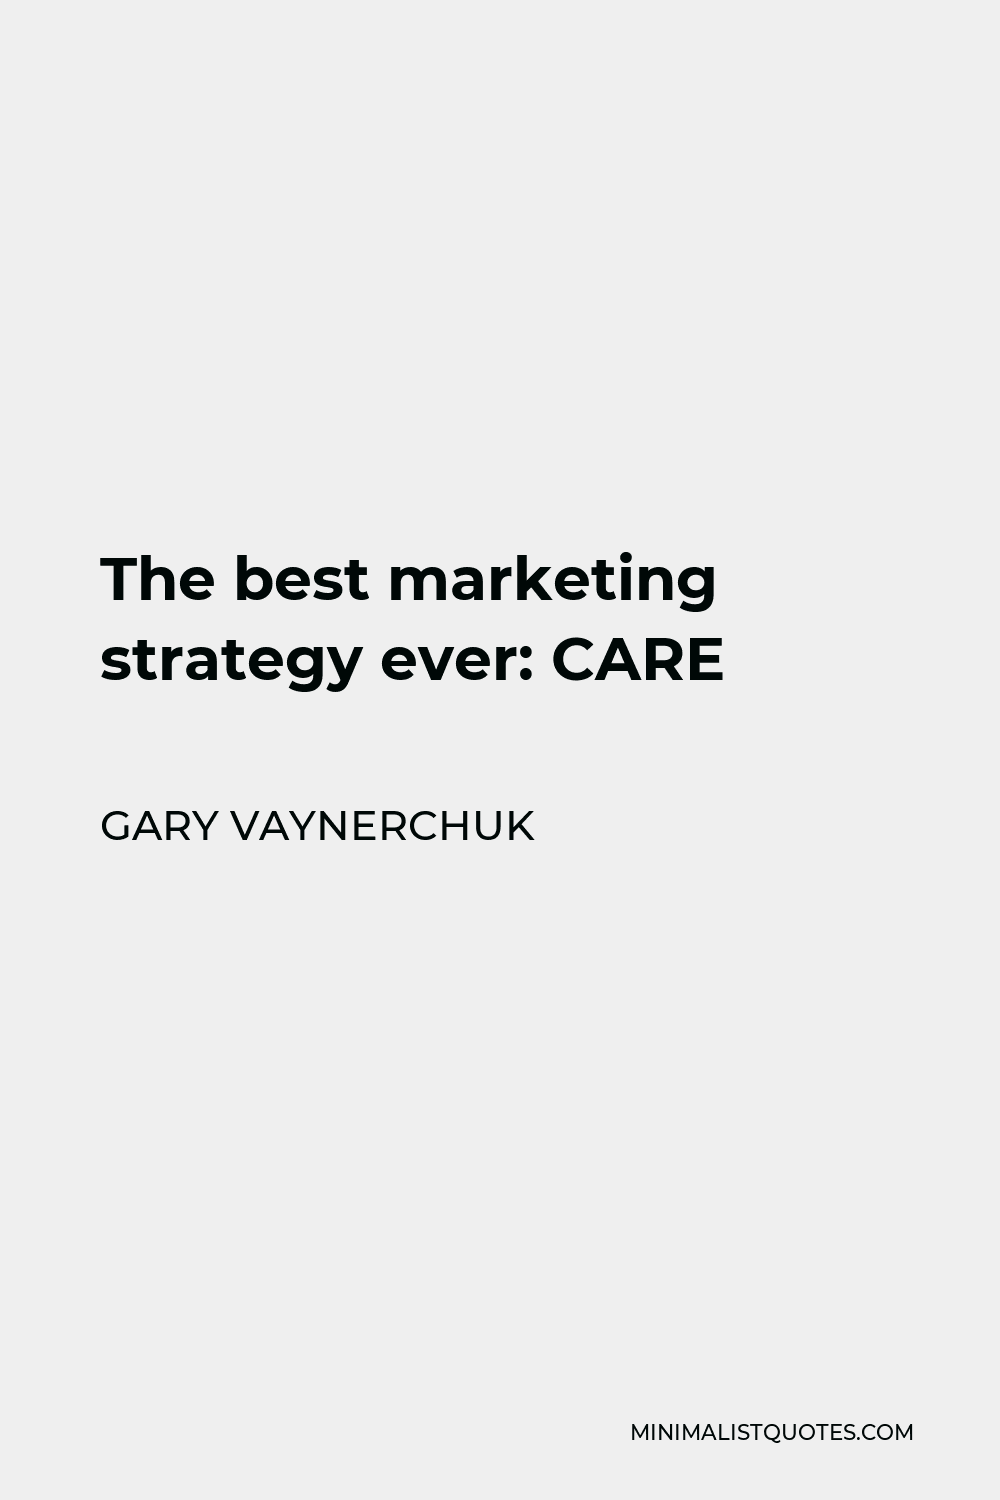 Gary Vaynerchuk Quote - The best marketing strategy ever: CARE